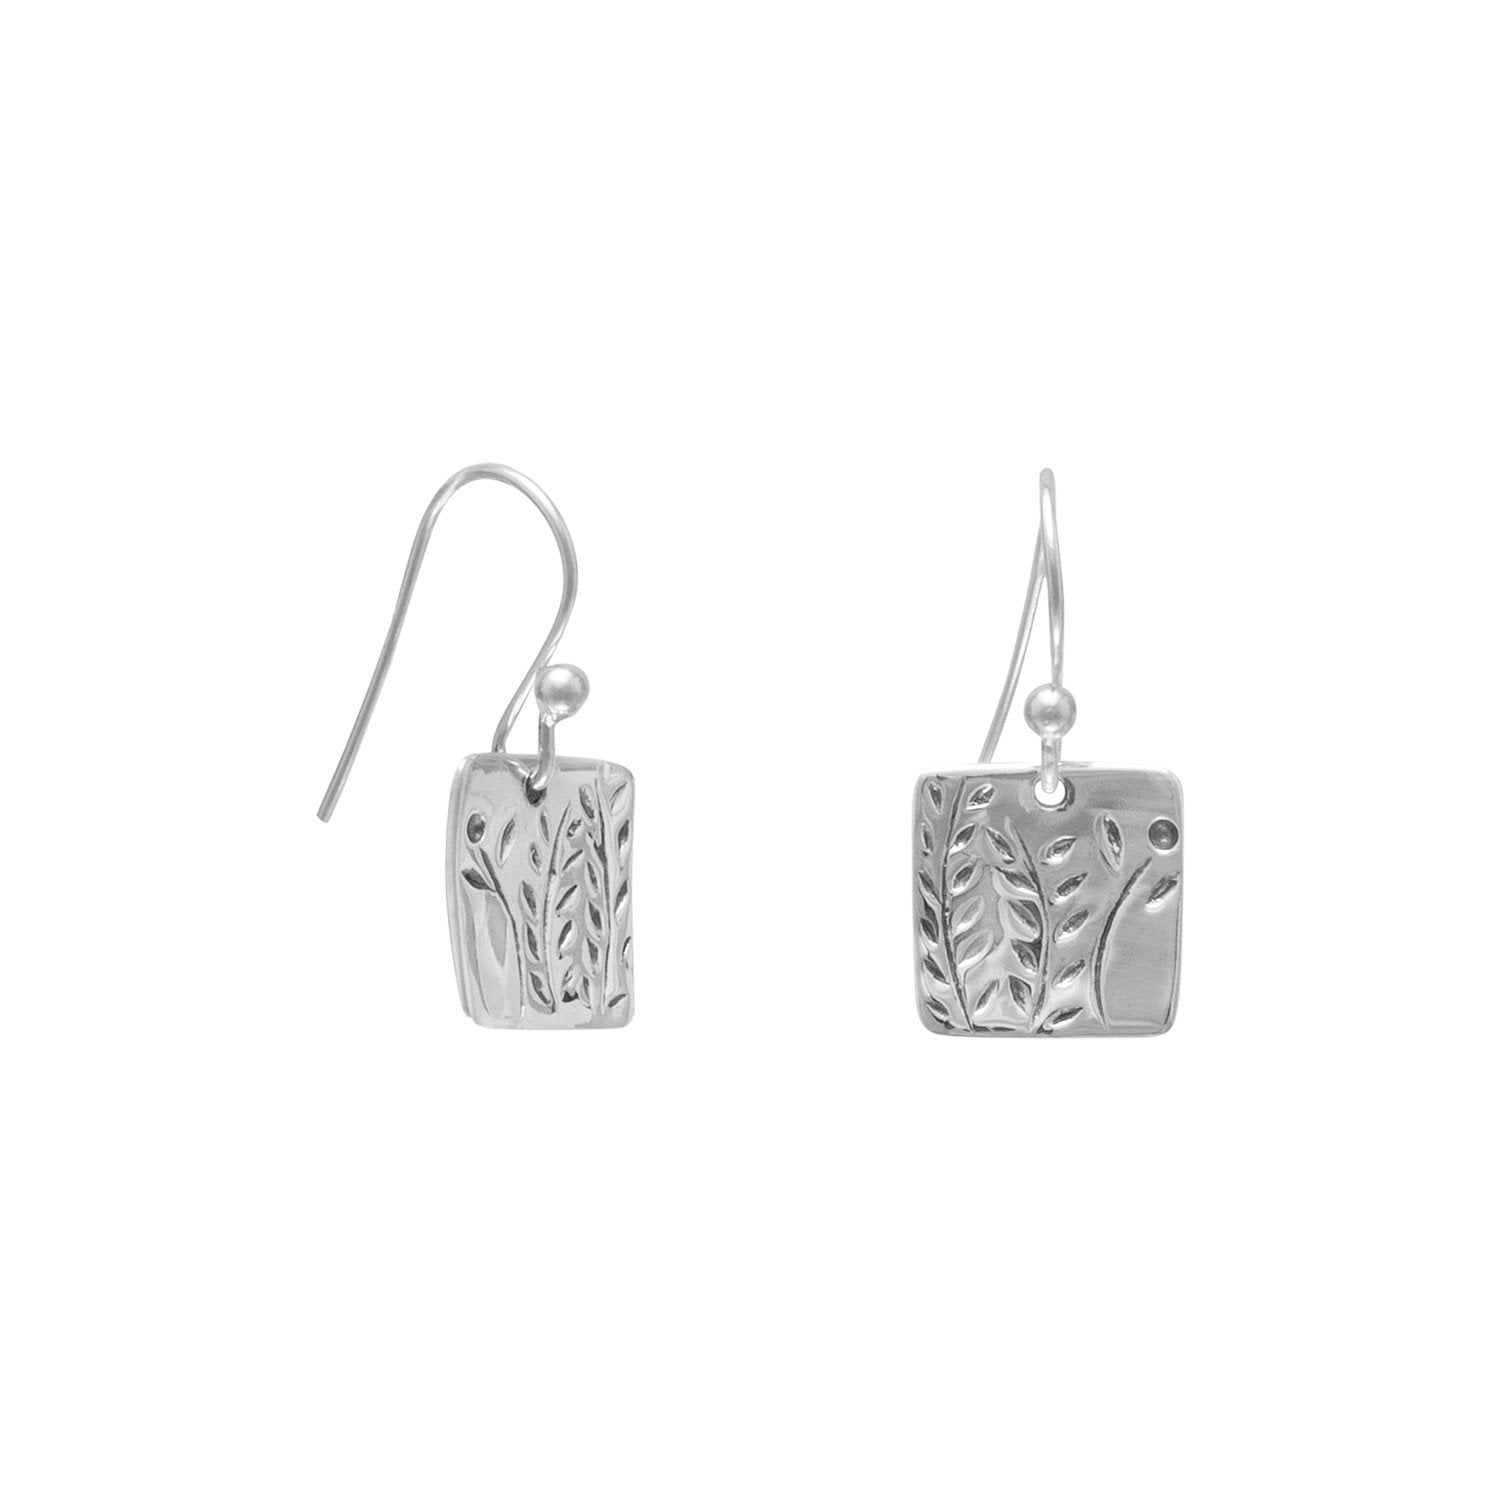 French Wire Earrings with Fern Design - Joyeria Lady